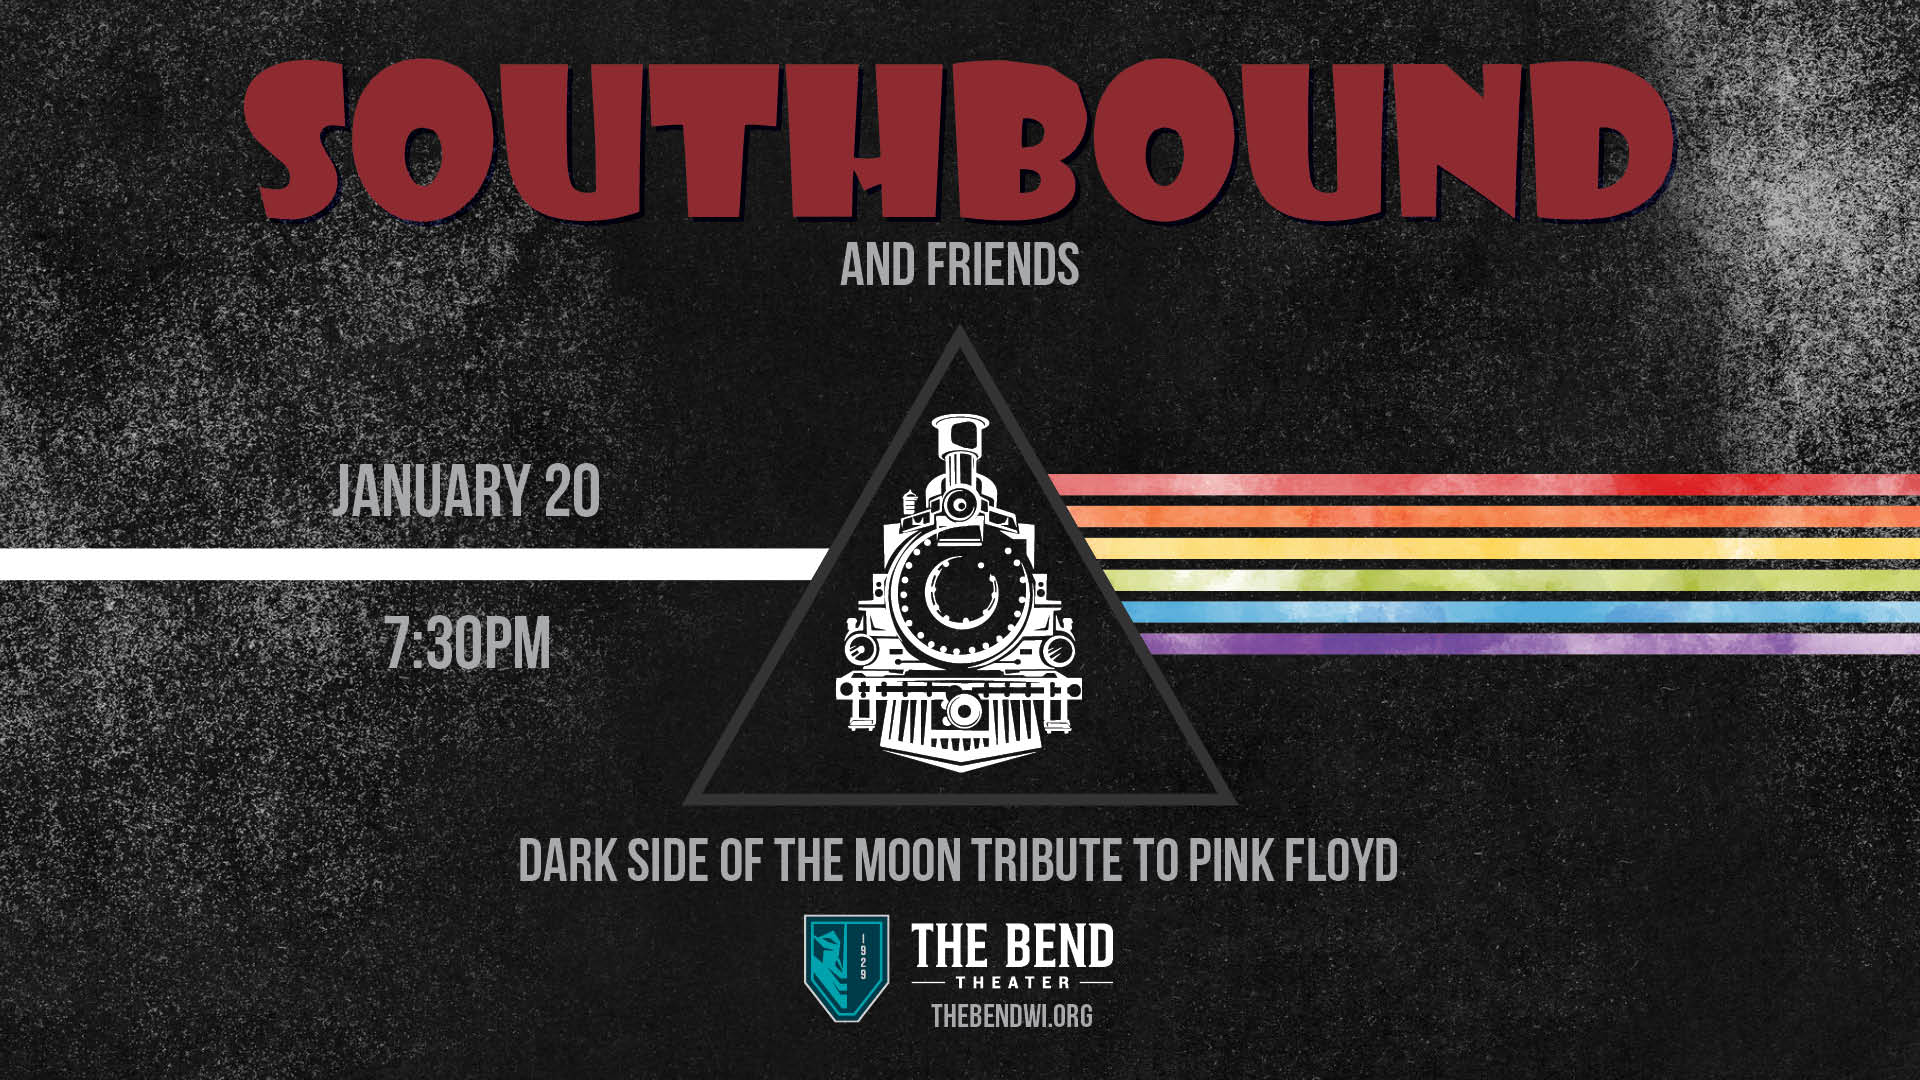 Southbound and Friends Live at The Bend Theater